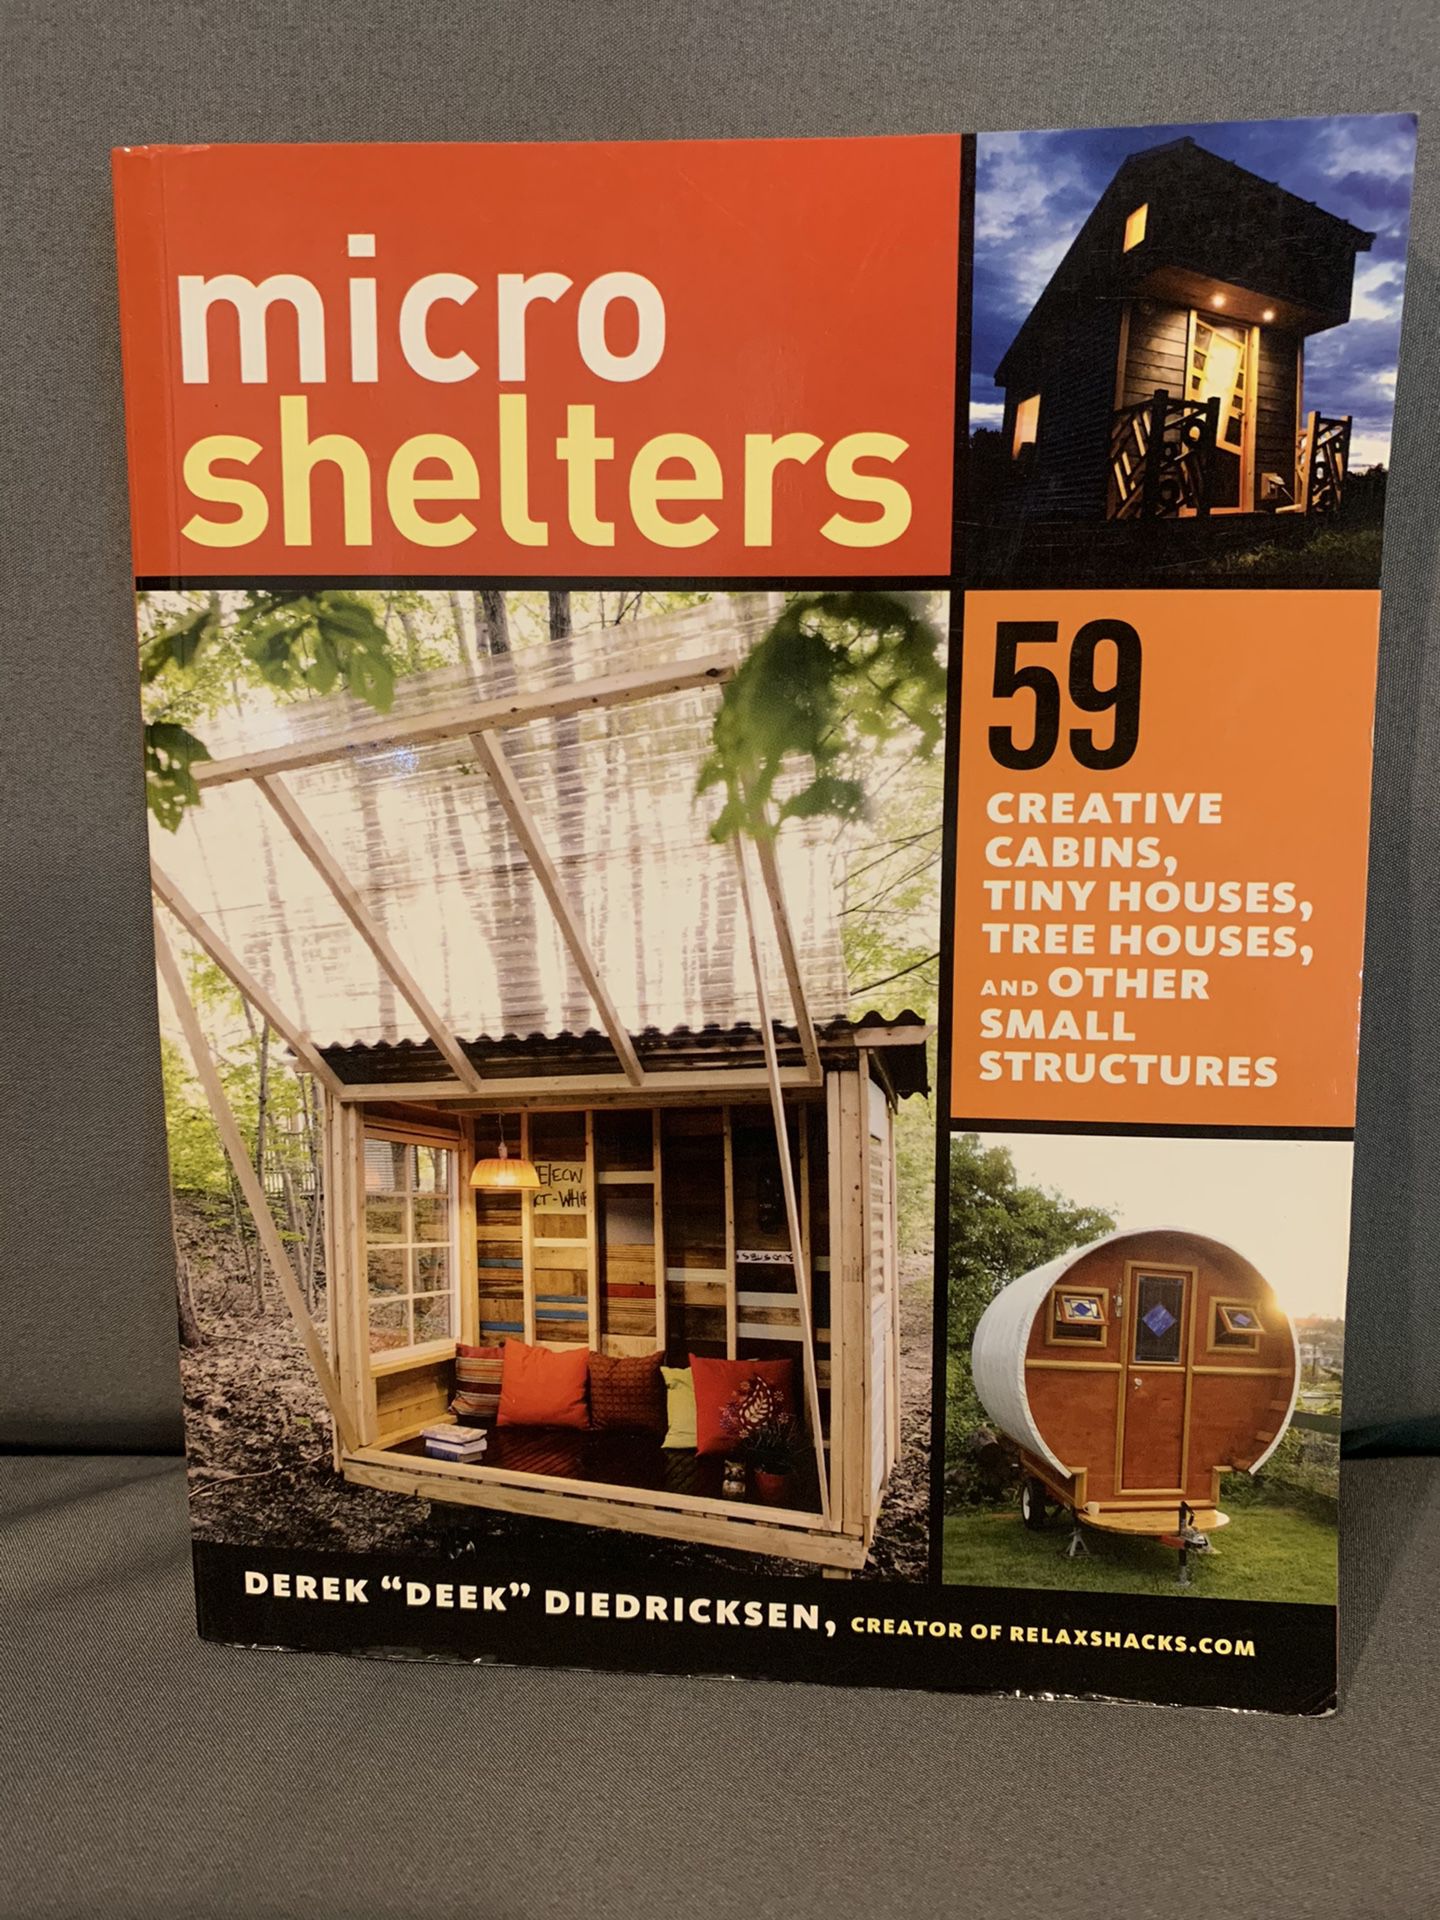 Micro shelters paperback book